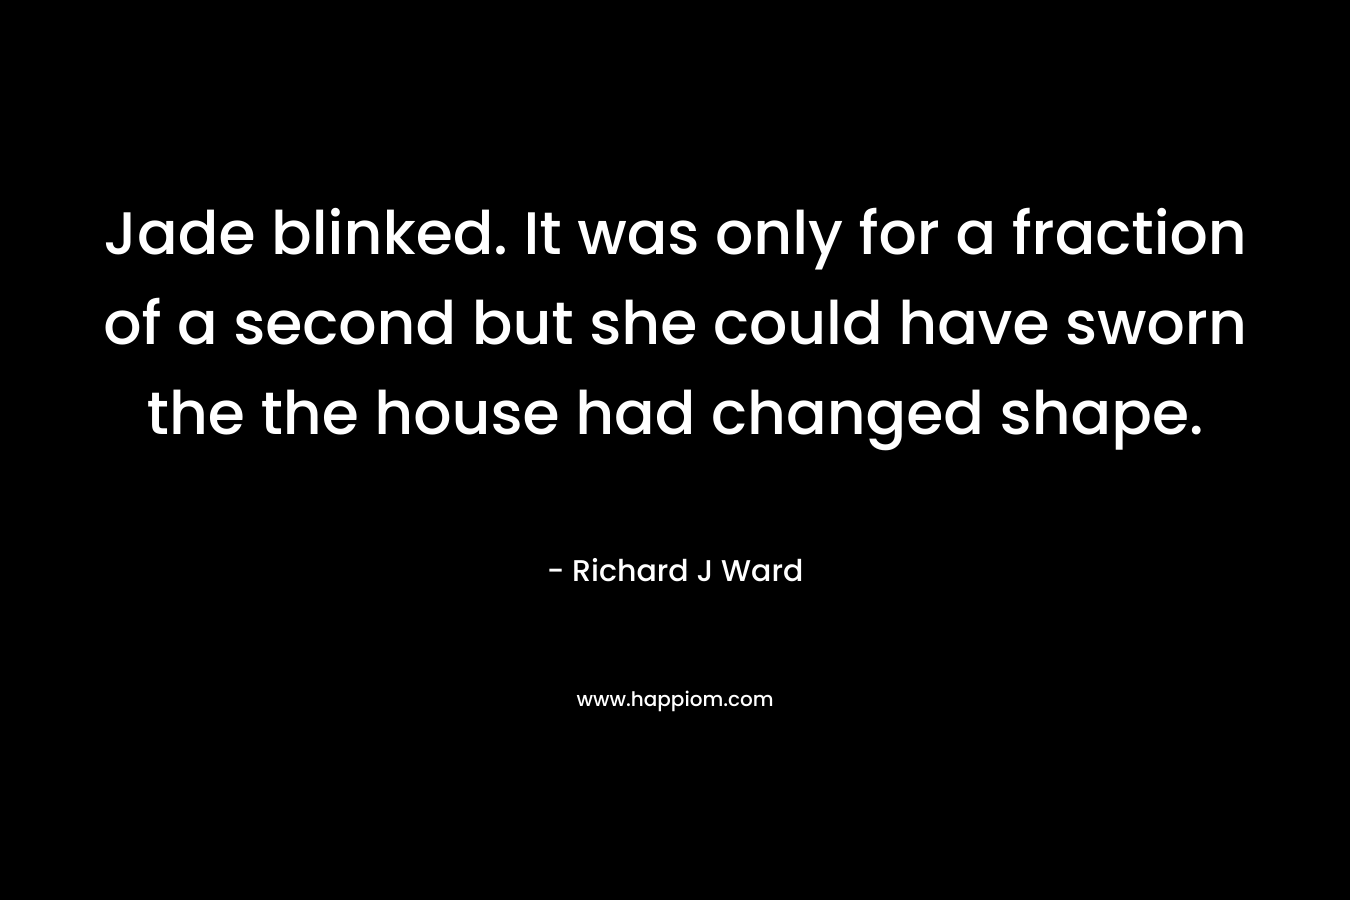 Jade blinked. It was only for a fraction of a second but she could have sworn the the house had changed shape. – Richard J Ward